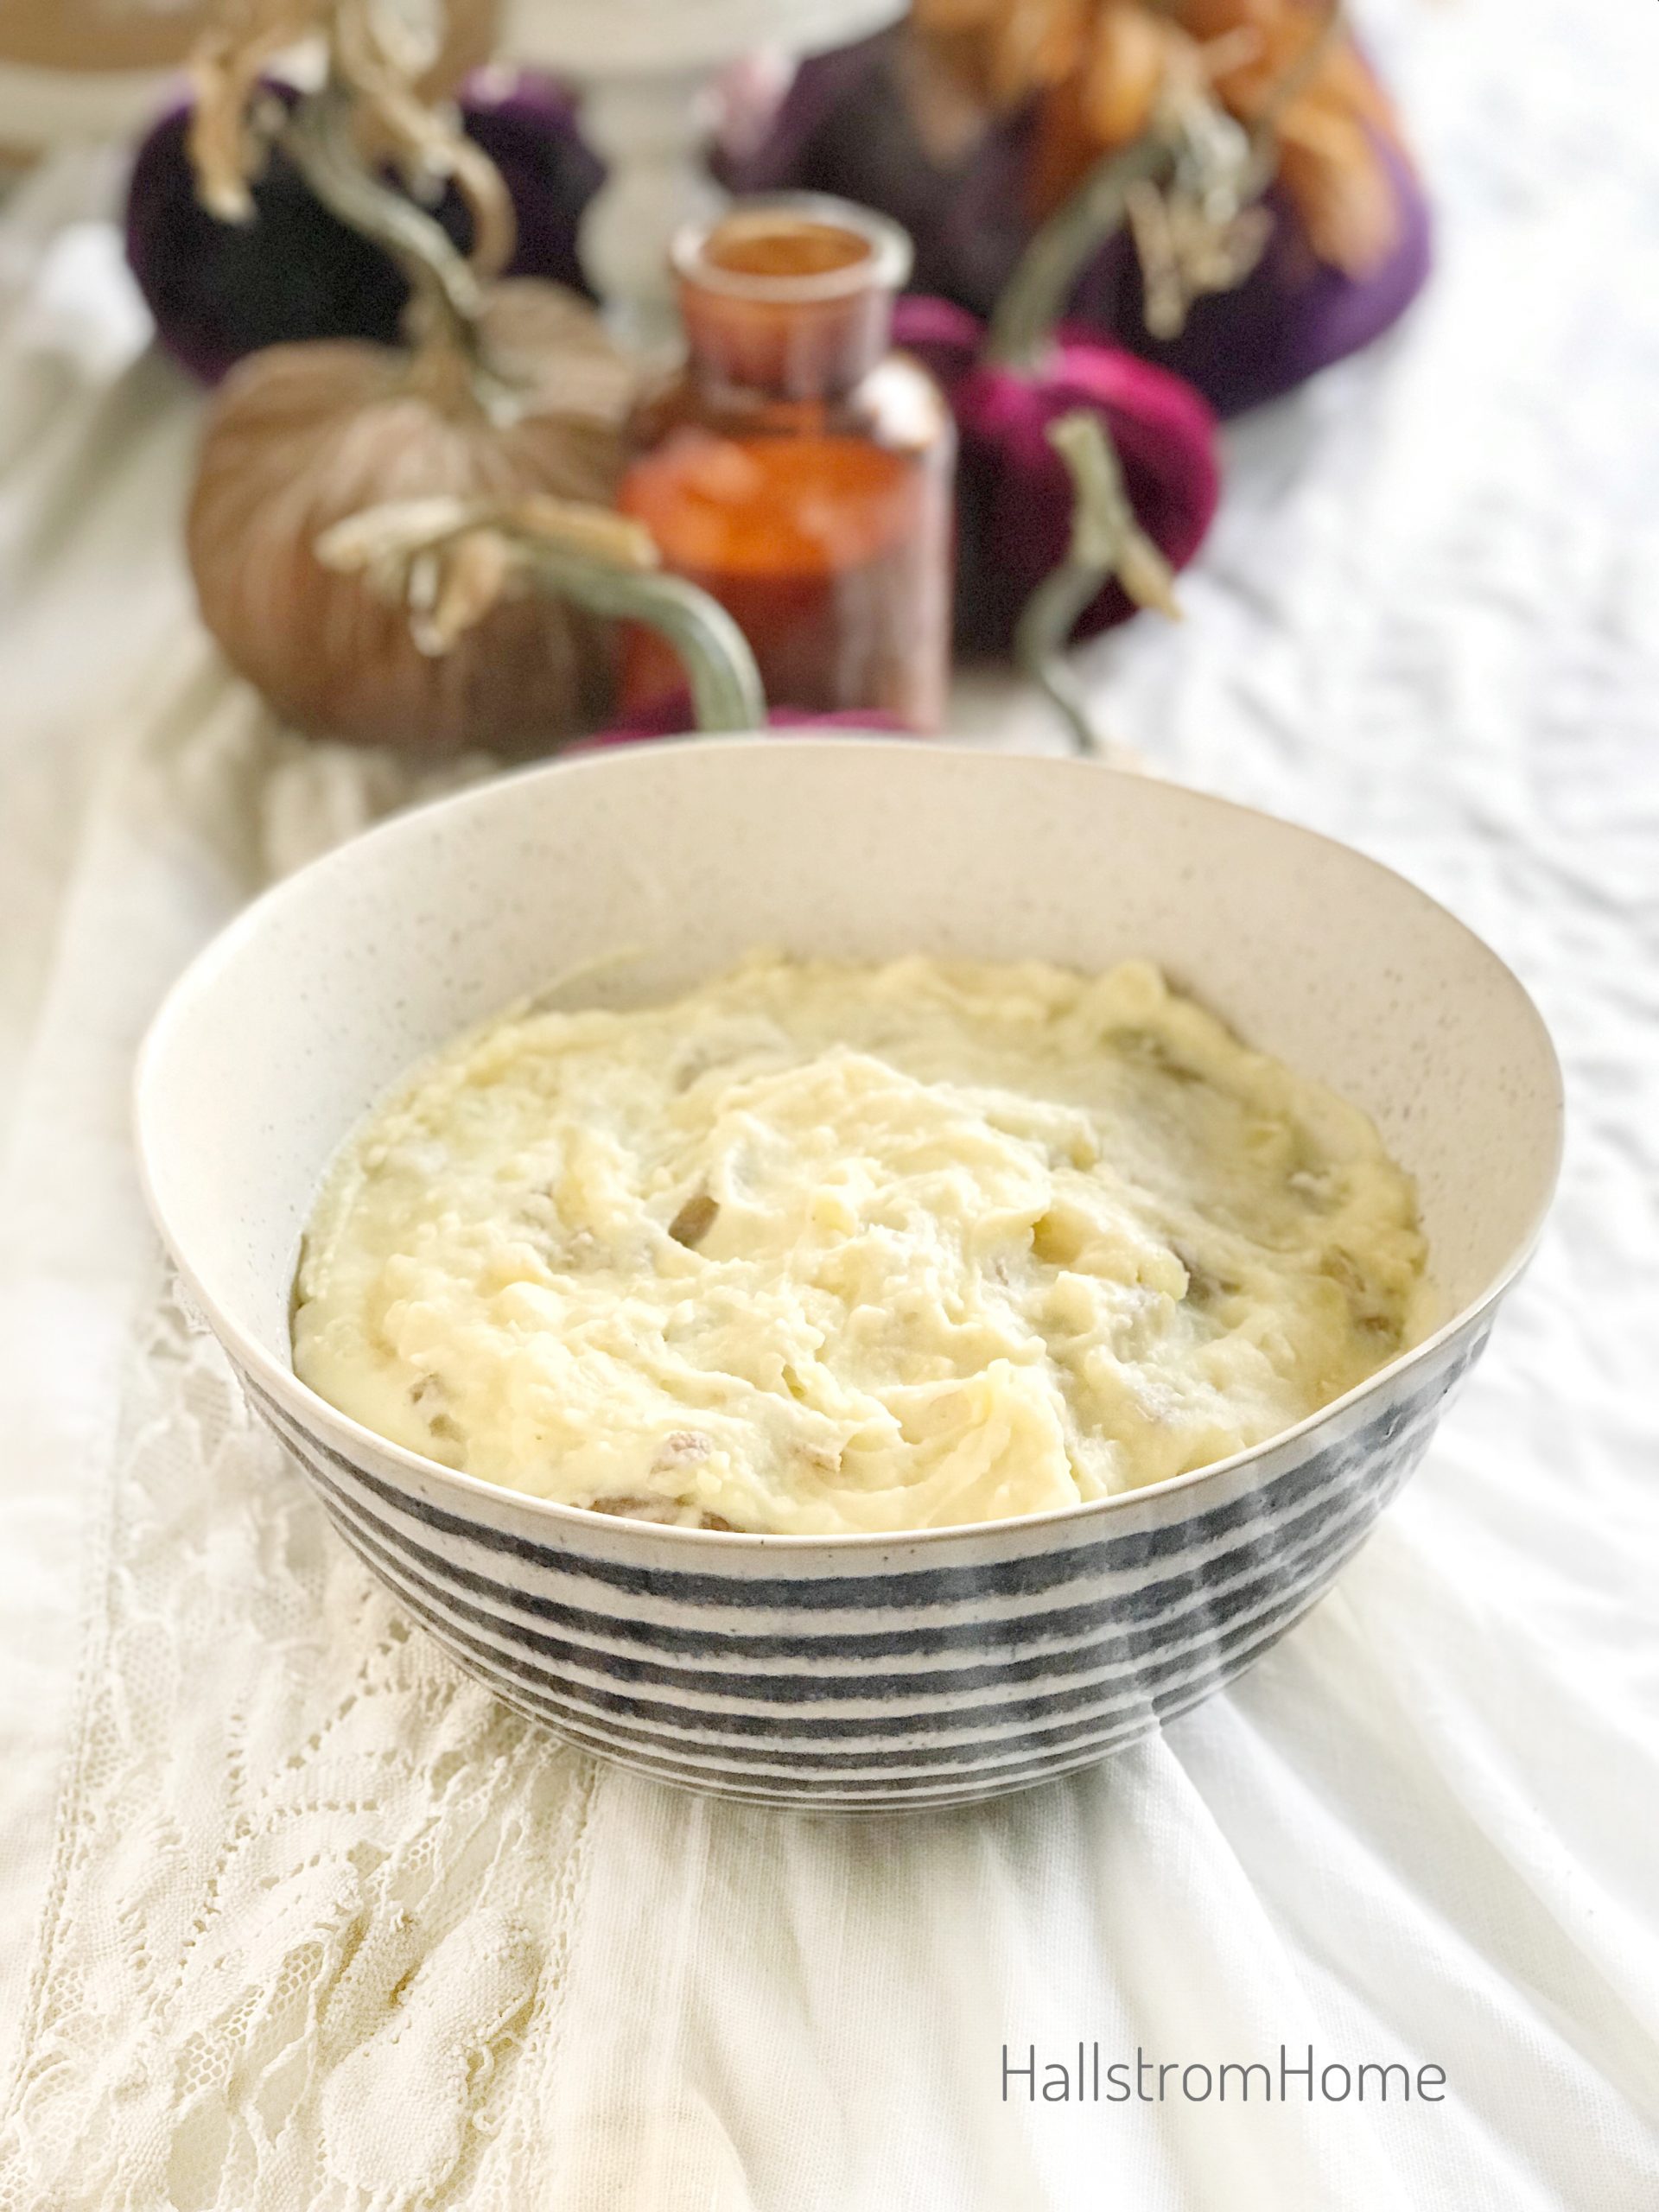 Mashed Potatoes Homemade / Recipe For The Best Mashed Potatoes / Mashed Potatoes Recipe / Easy Mashed Potatoes / HallstromHome